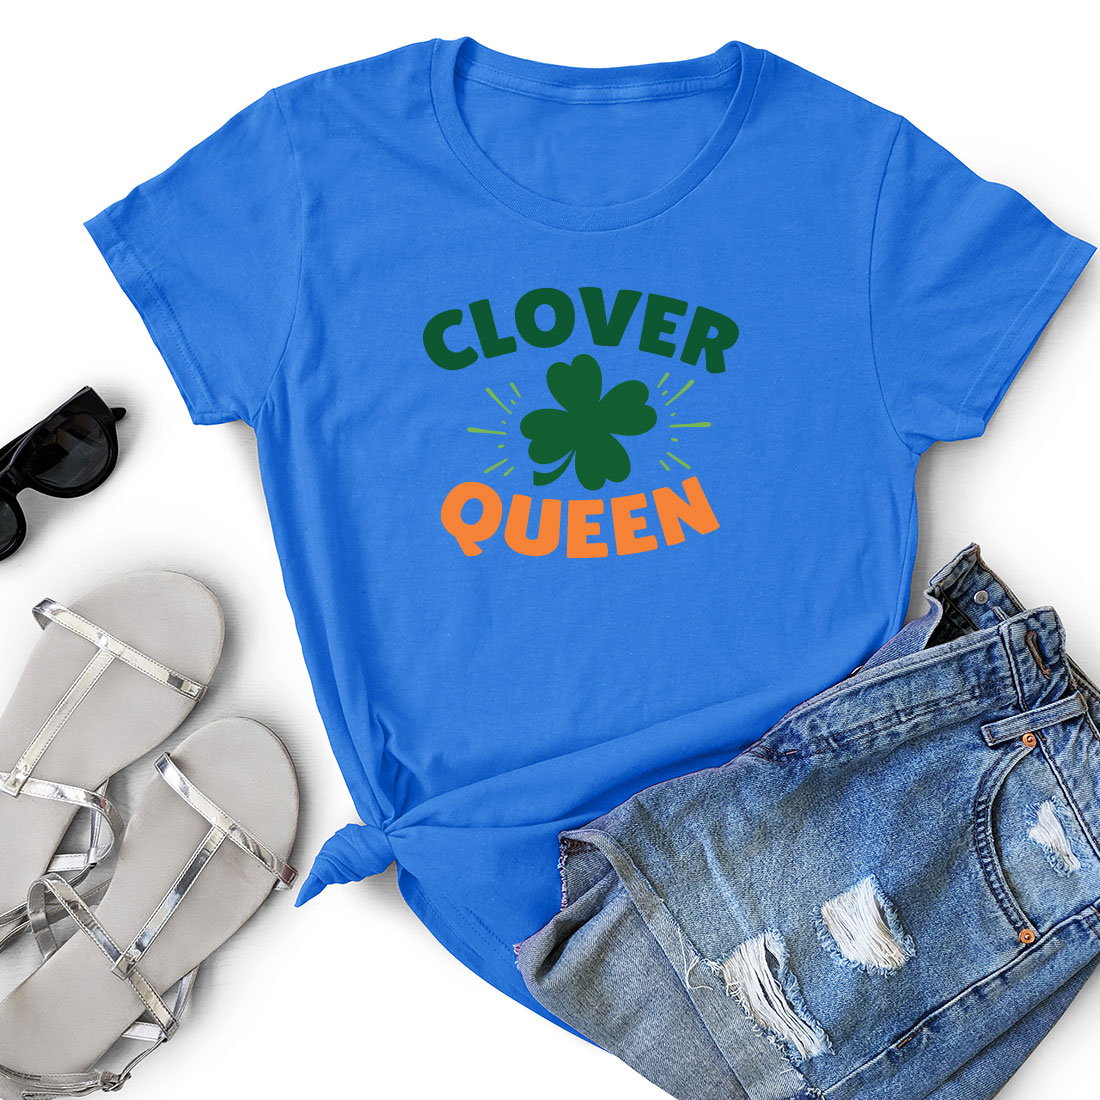 T - shirt that says clover queen next to a pair of shorts.